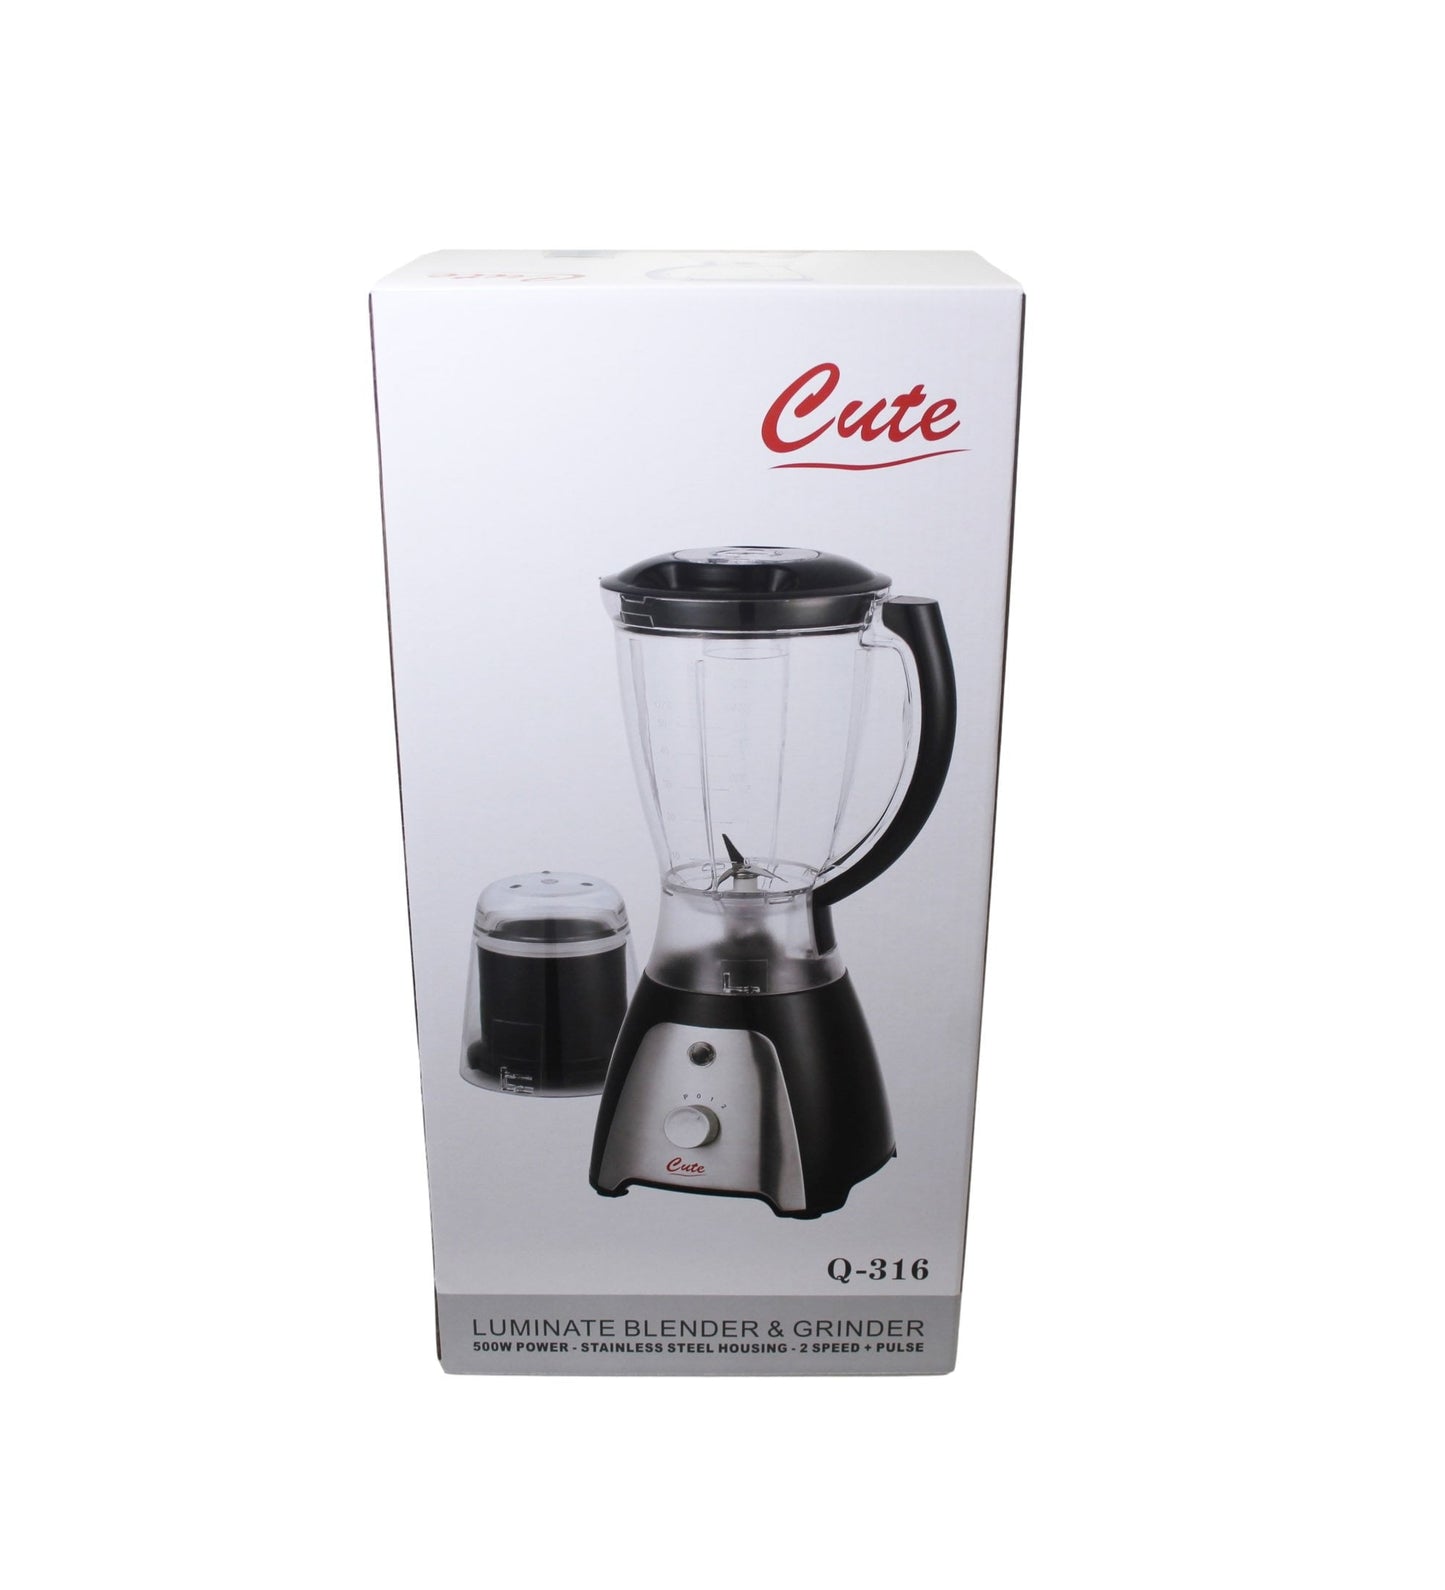 Cute Luminate Blender and Grinder 500W Power 2 Speed + Pulse Q316 (Parcel Rate)